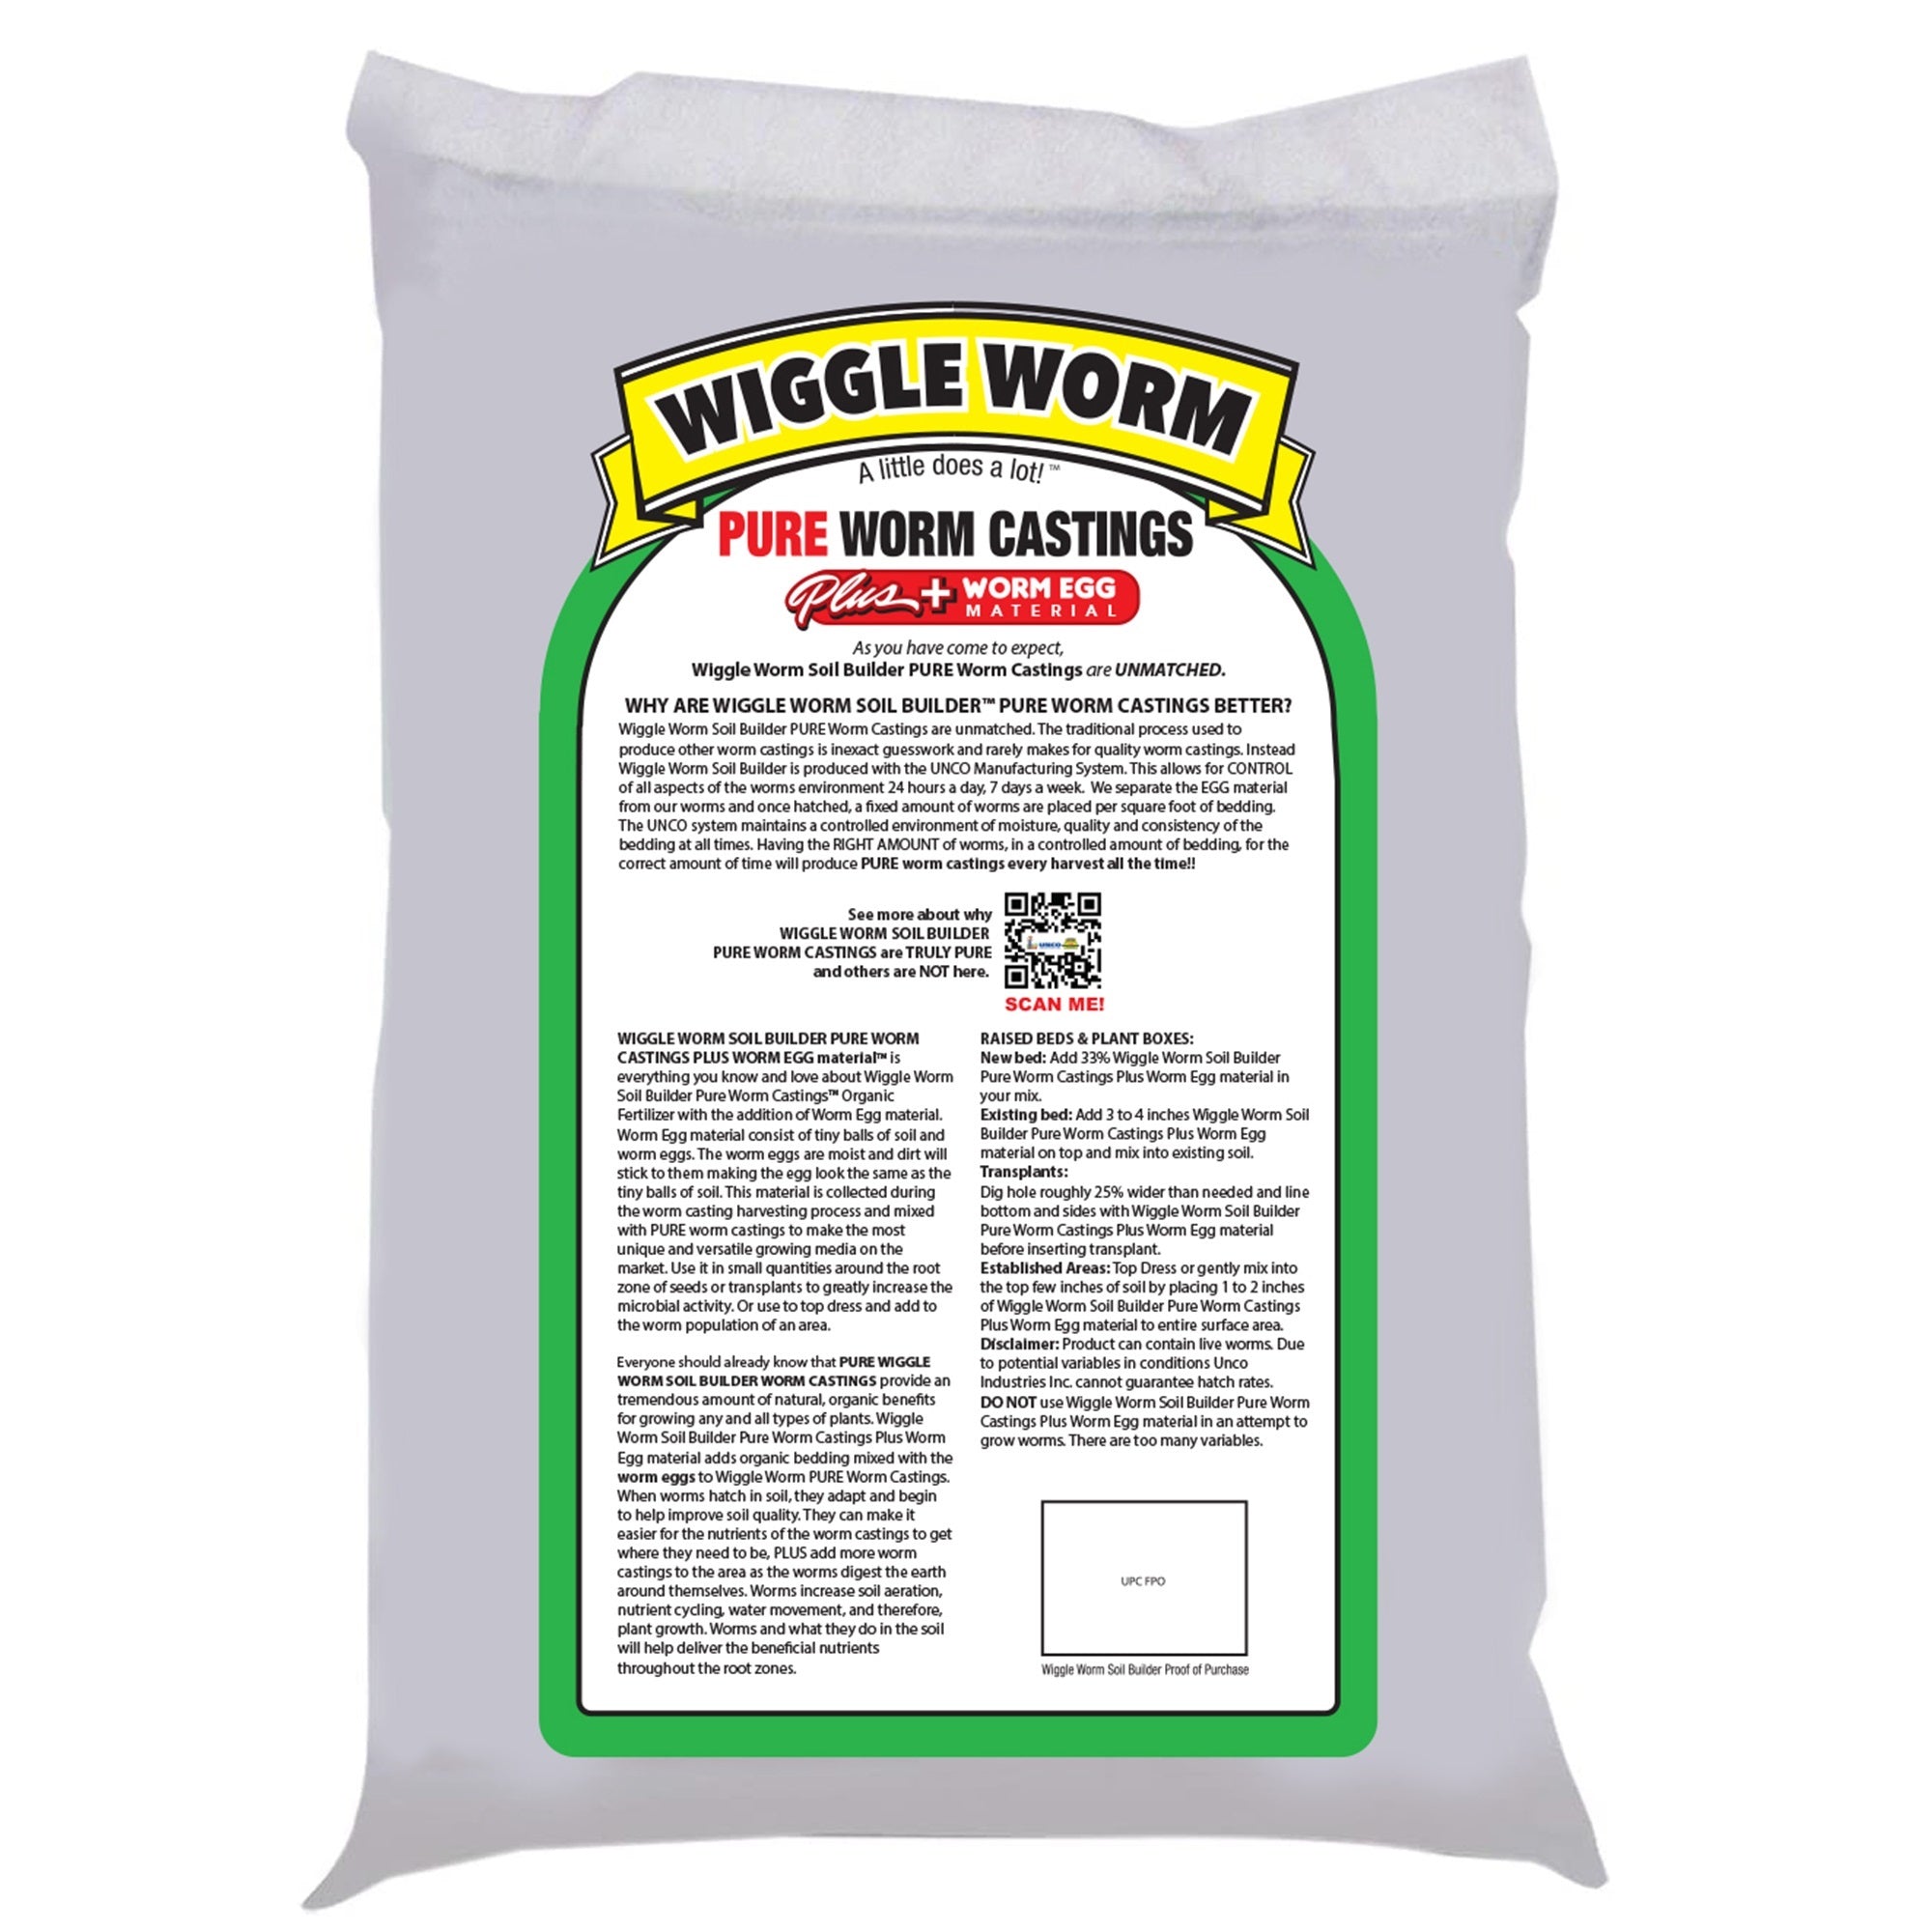 WIGGLE WORM PURE Worm Castings PLUS Worm Egg Material, 40 Pounds